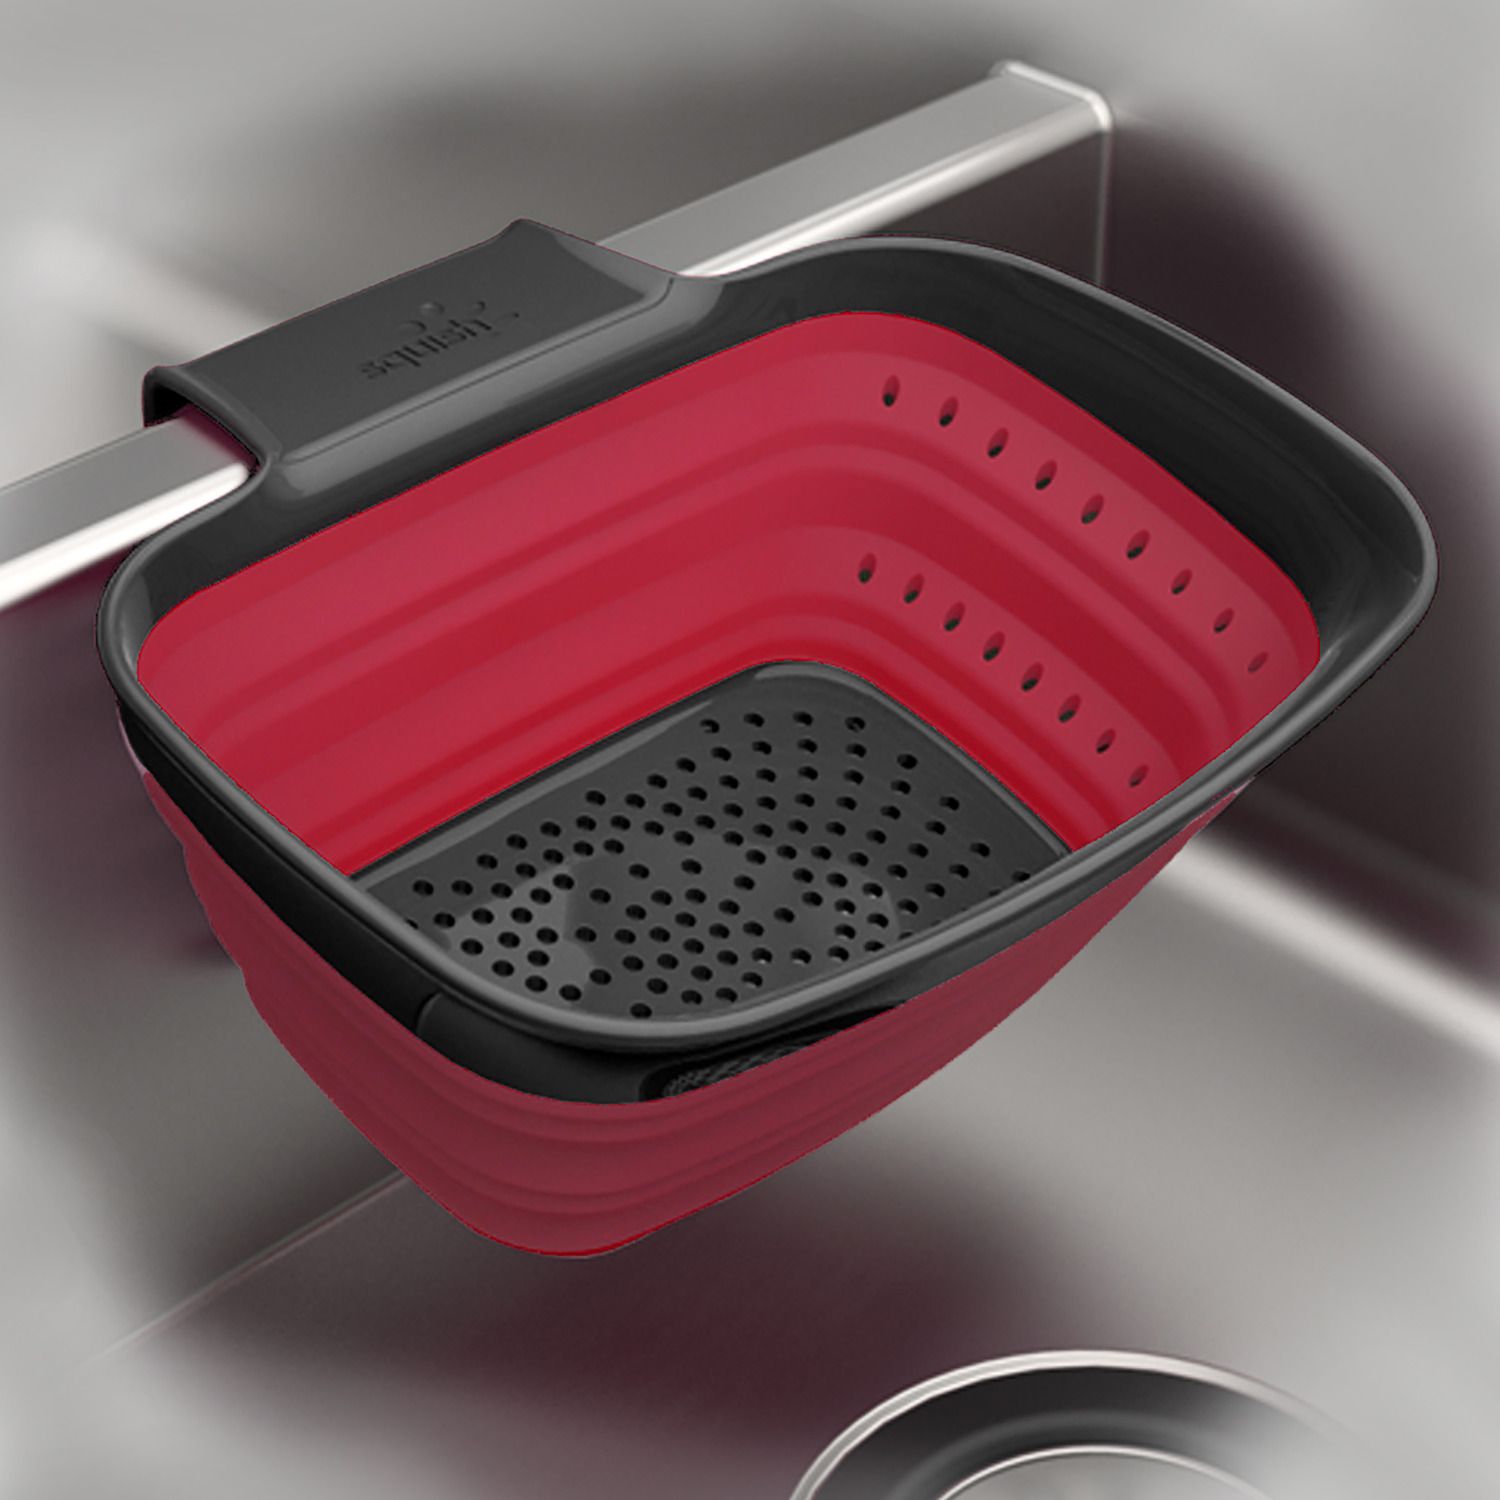 rubbermaid collapsible colander